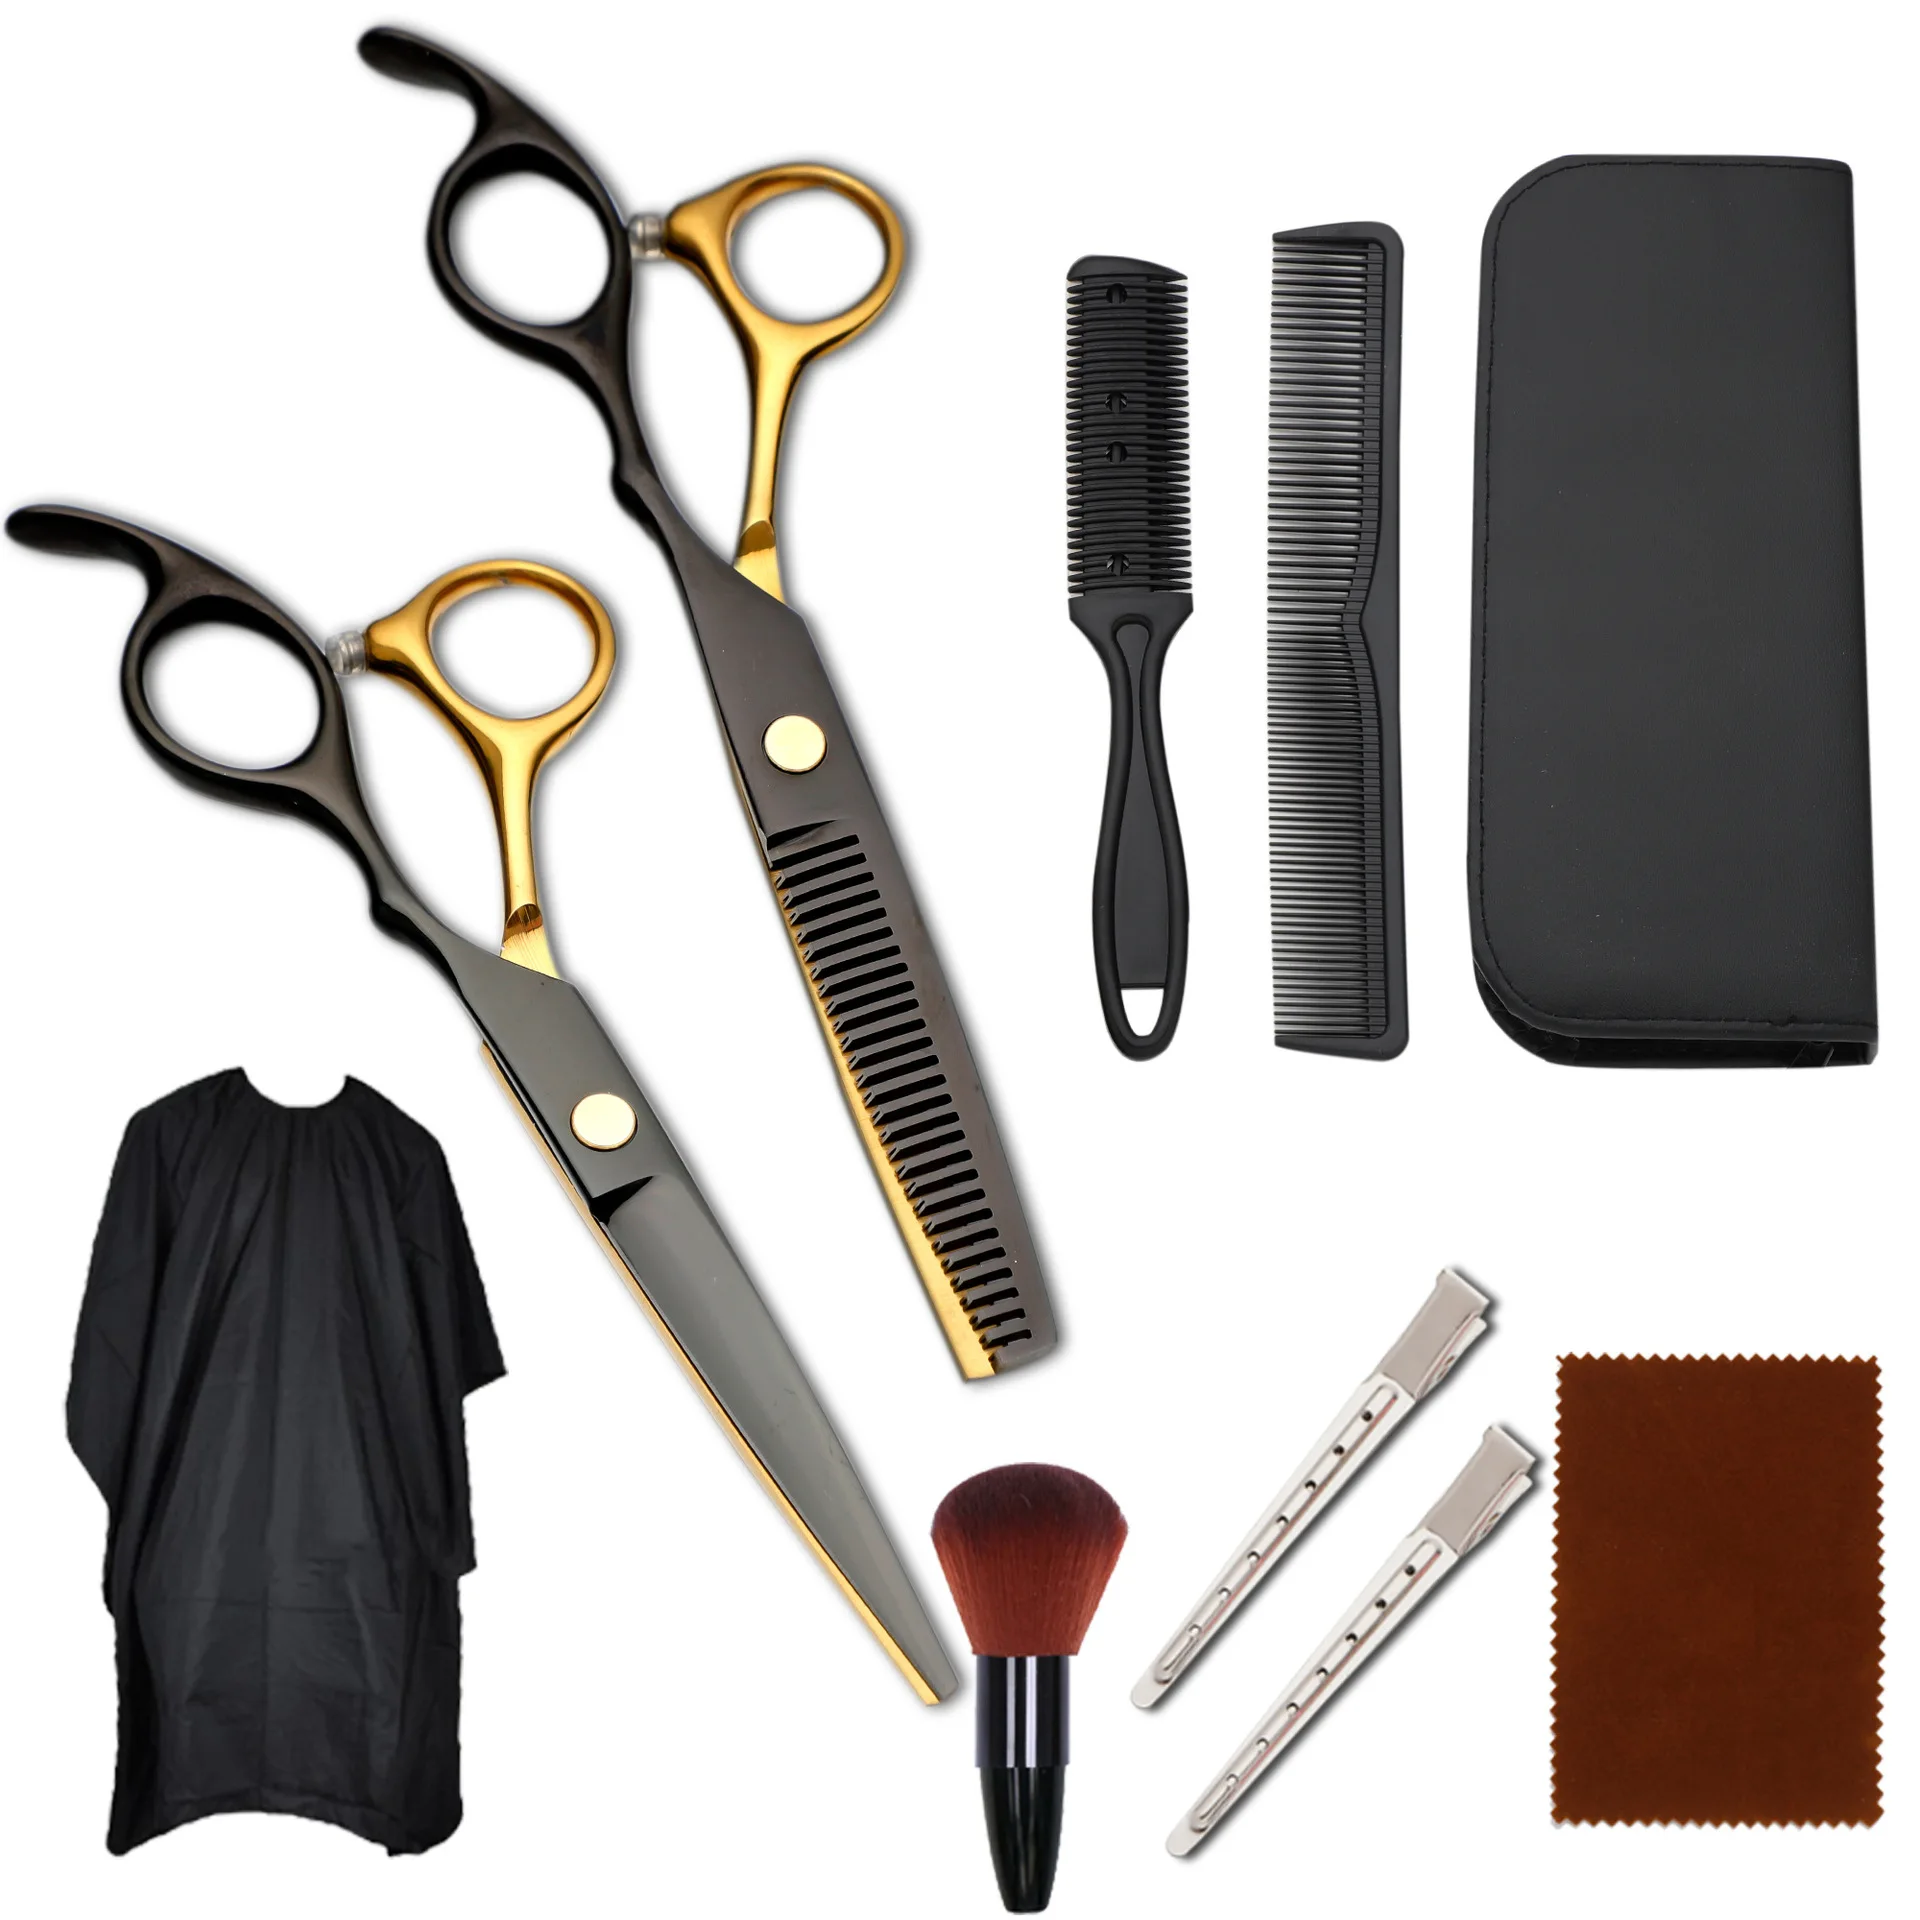 6inch Profissional Hairdressing Scissor Hair Cutting Set double-ended comb kit Barber Shear black/gold Salon Multi-color optiona